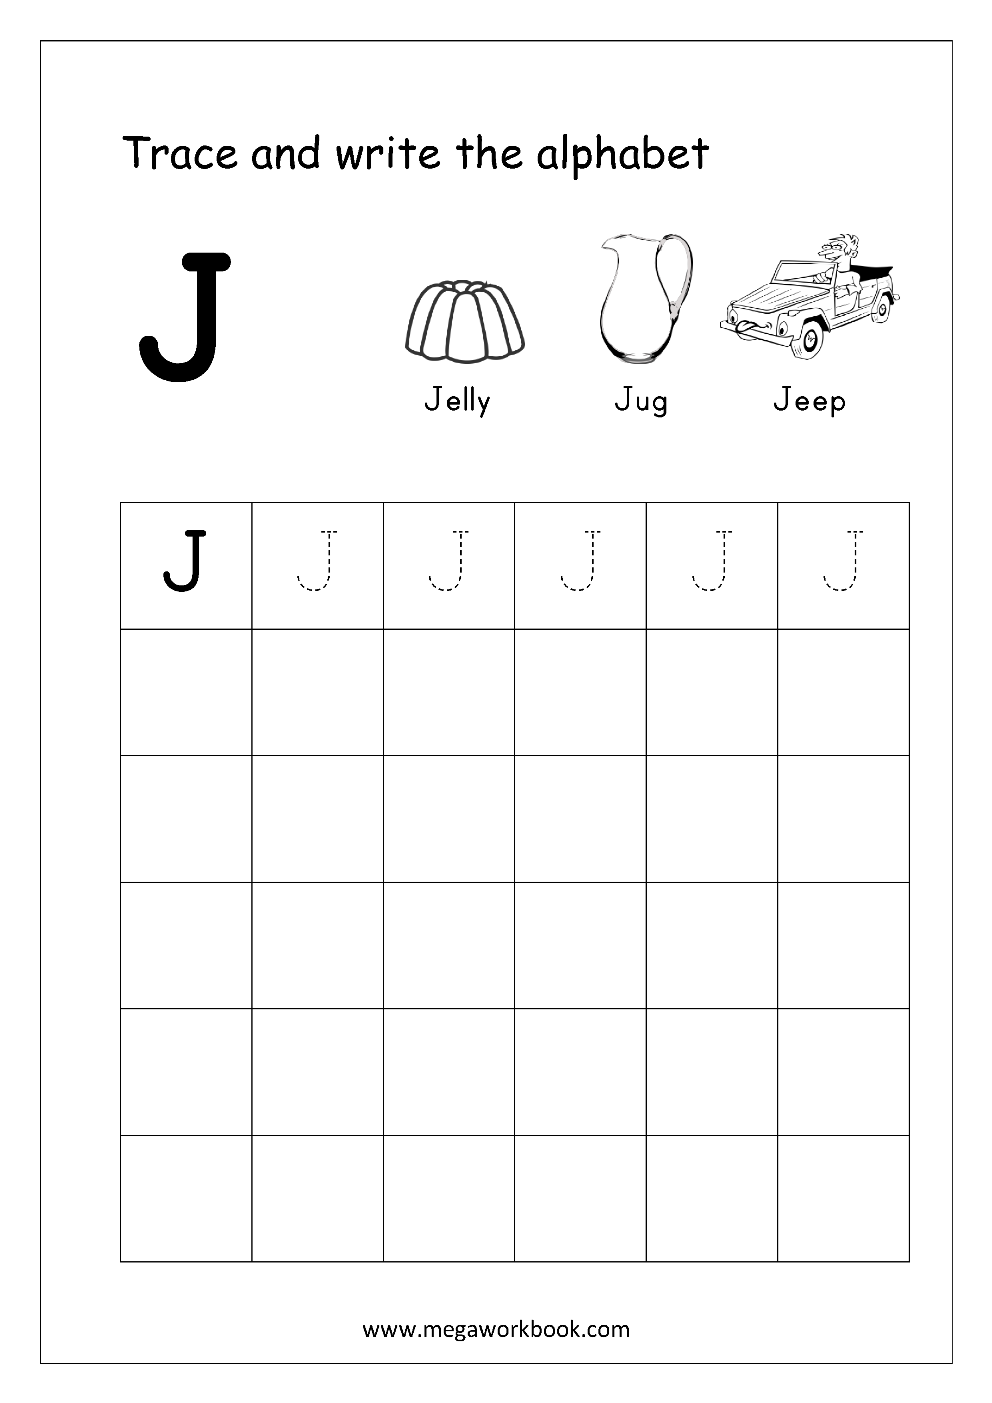 Free English Worksheets - Alphabet Writing (Capital Letters) - Letter